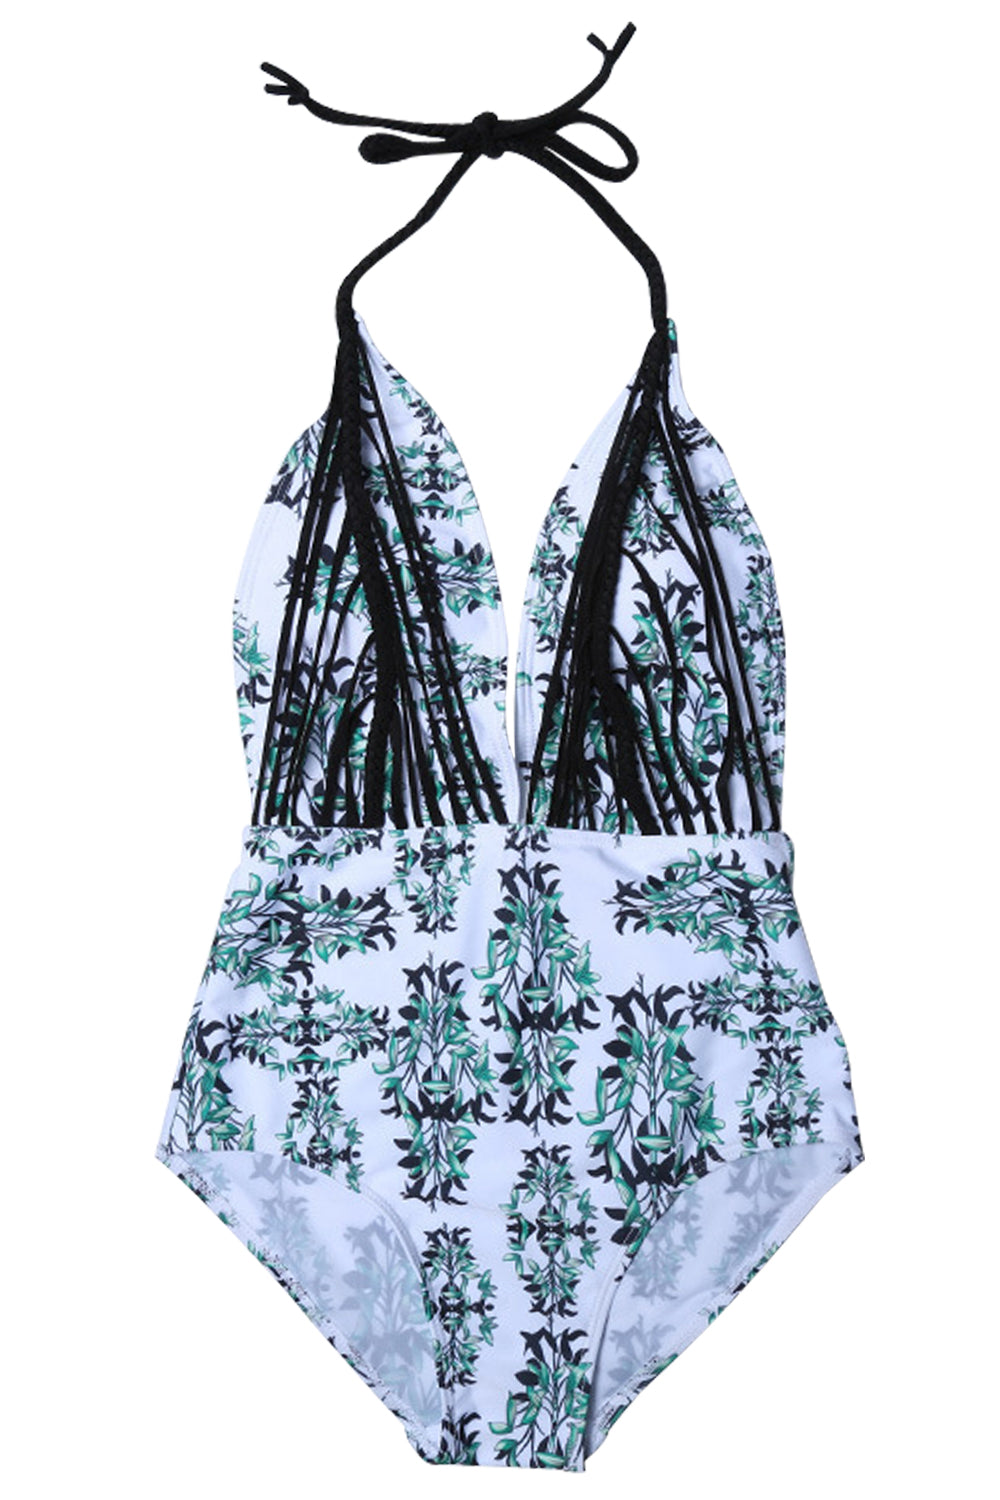 Iyasson Sexy Green Leaves Printing Deep V-neck Halter One-piece Swimsuit